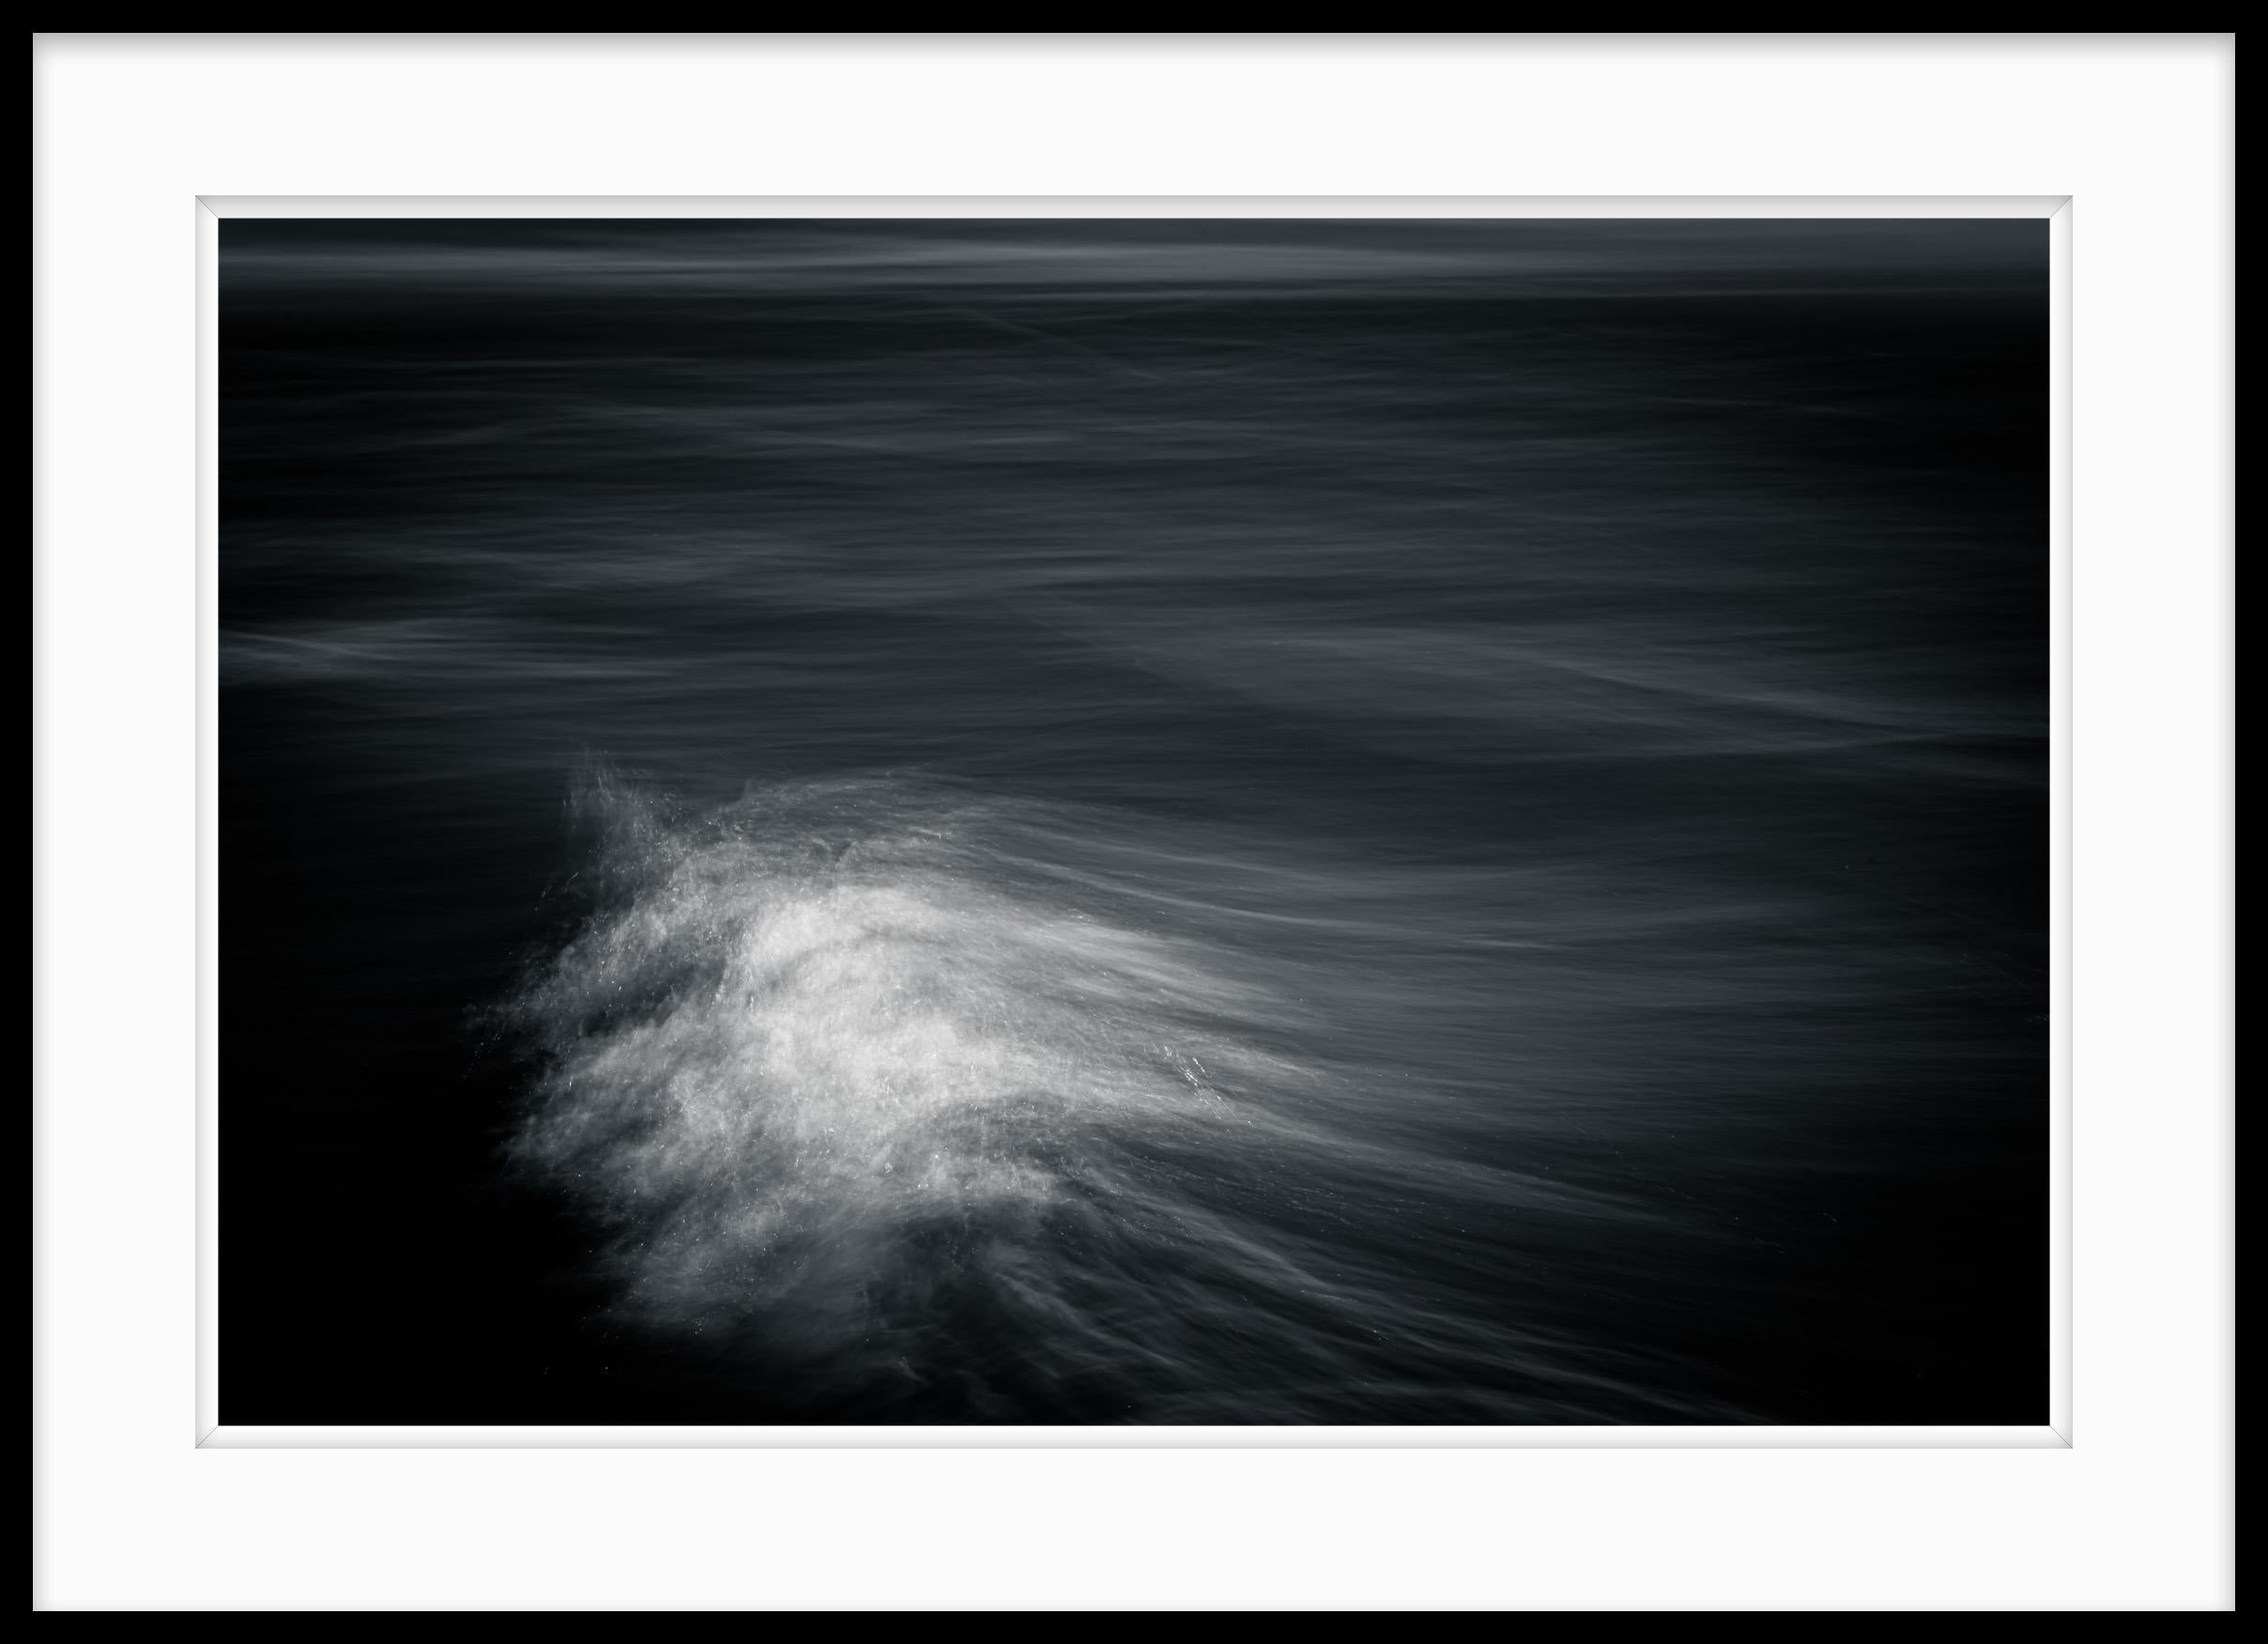 
Limited Edition 1/10 Black and White Photograph, Seascape, Ocean, Untitled #14
This is #14 from the Kinetic Solitude series. The series has been shown in the Dow Museum of Fine Arts as part of a exhibition that explored variations on the theme of